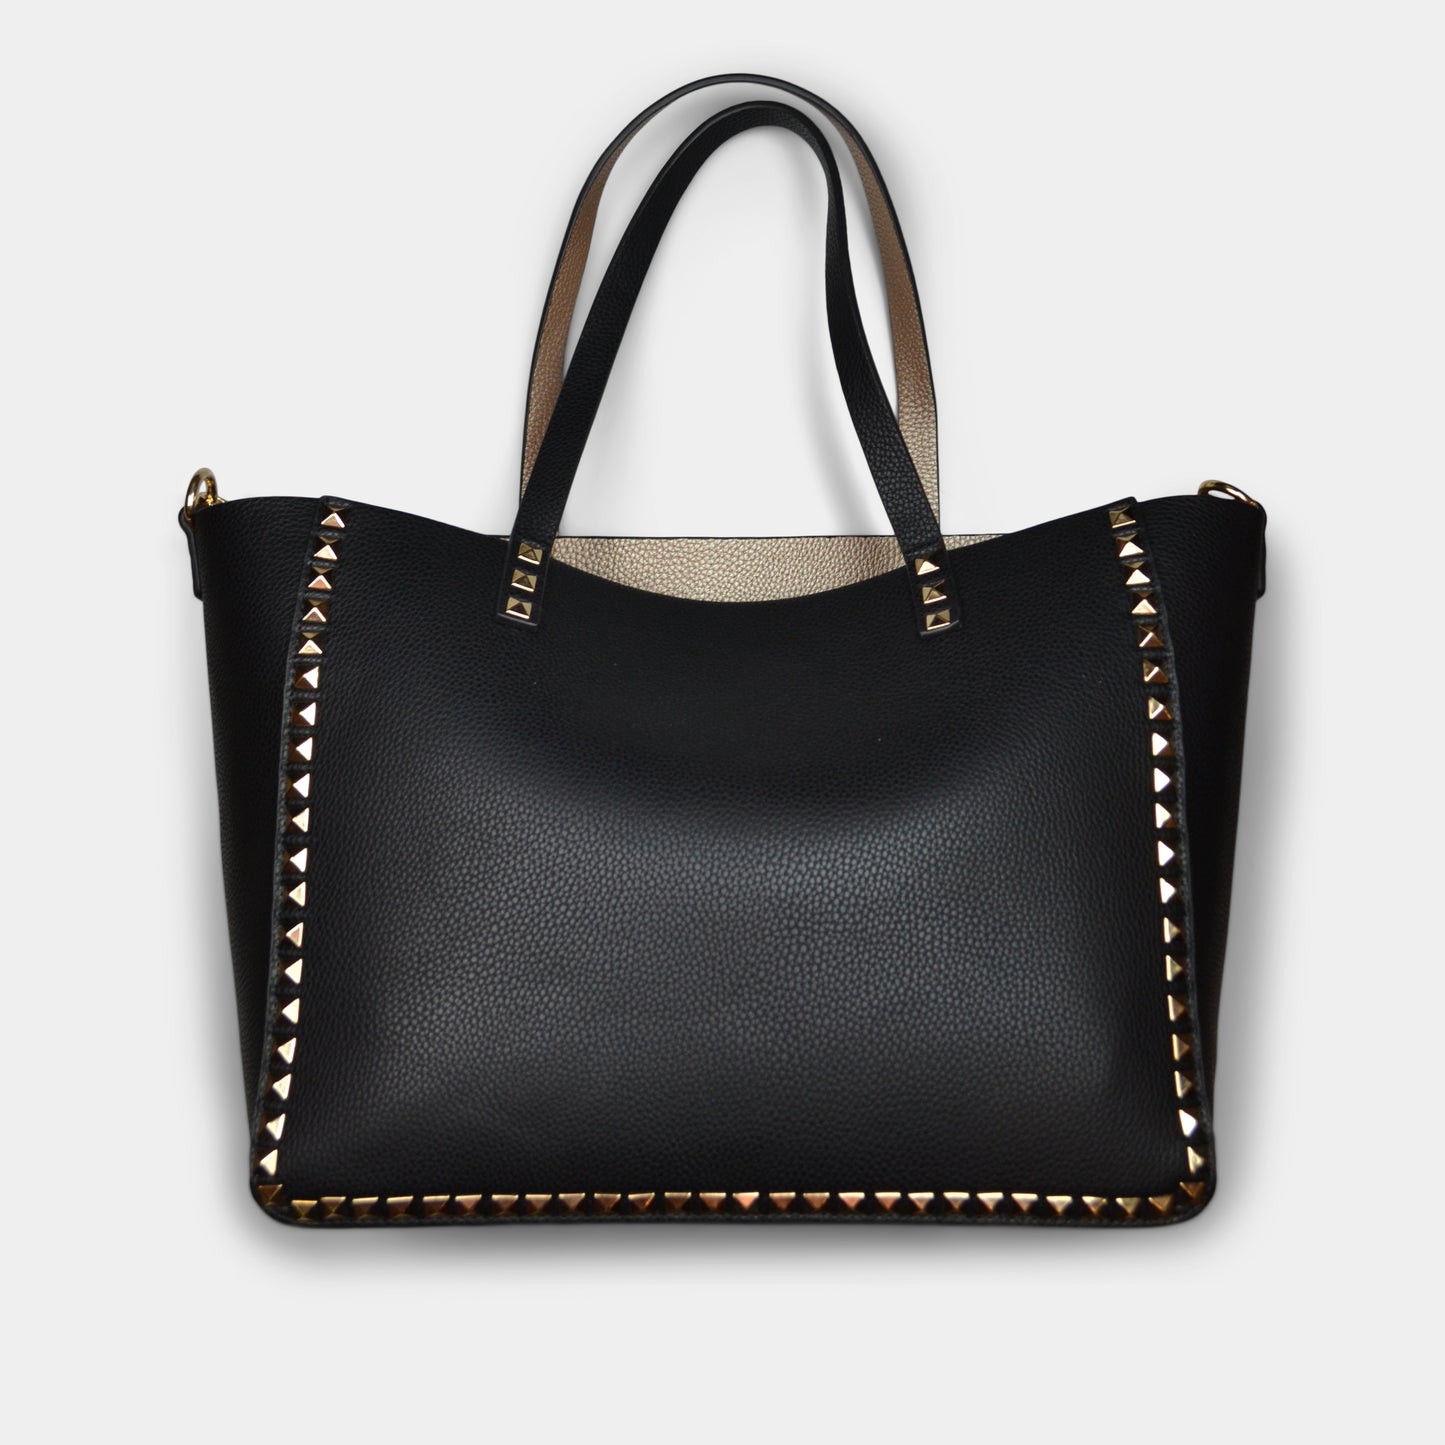 FASHION BY A STEP ABOVE BLACK TOTE WITH STUDS